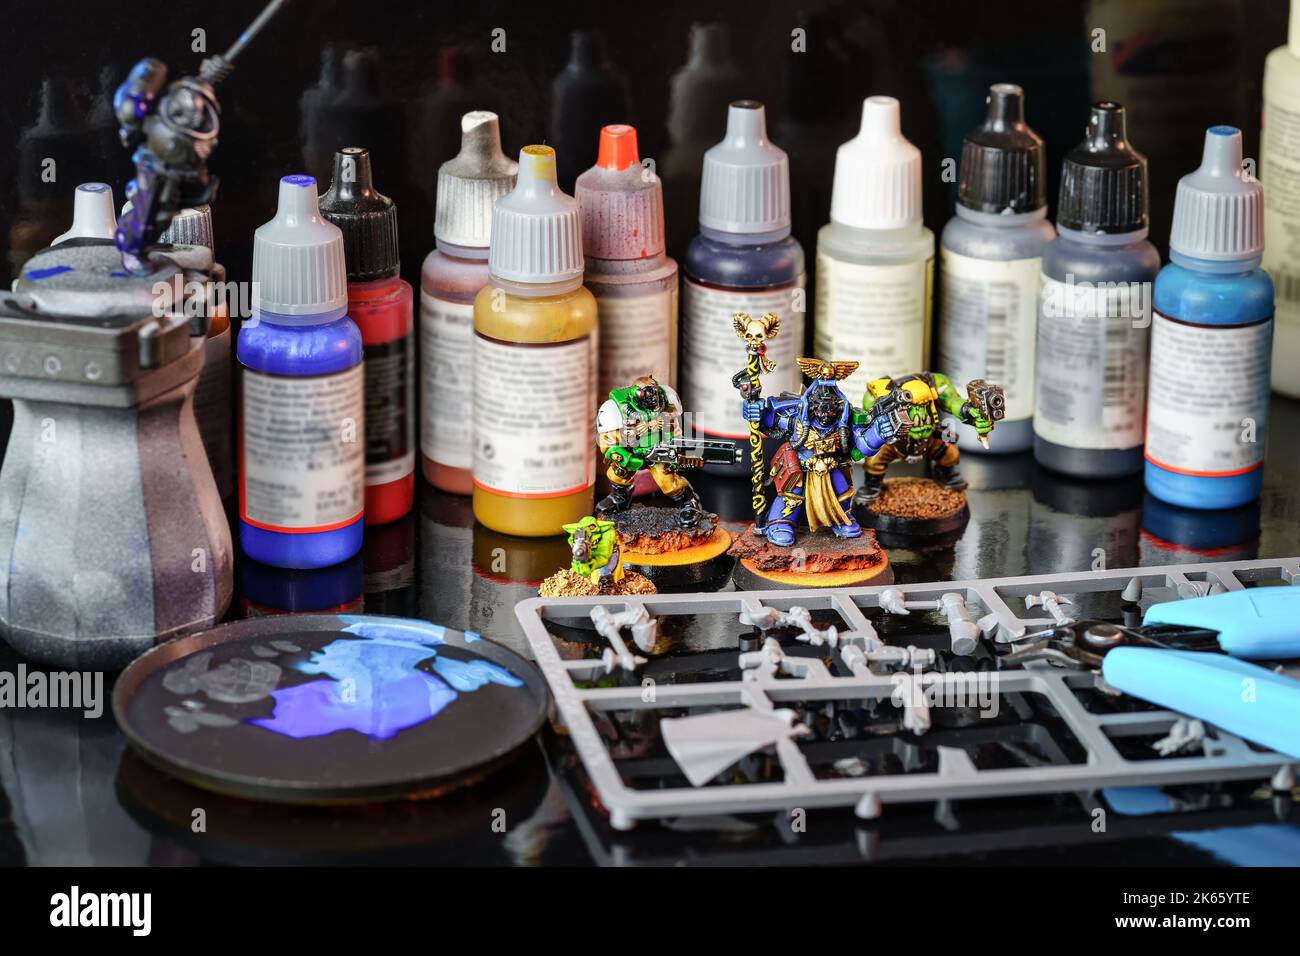 Set of products for painting and assembly of small figures used in role-playing board games. Stock Photo